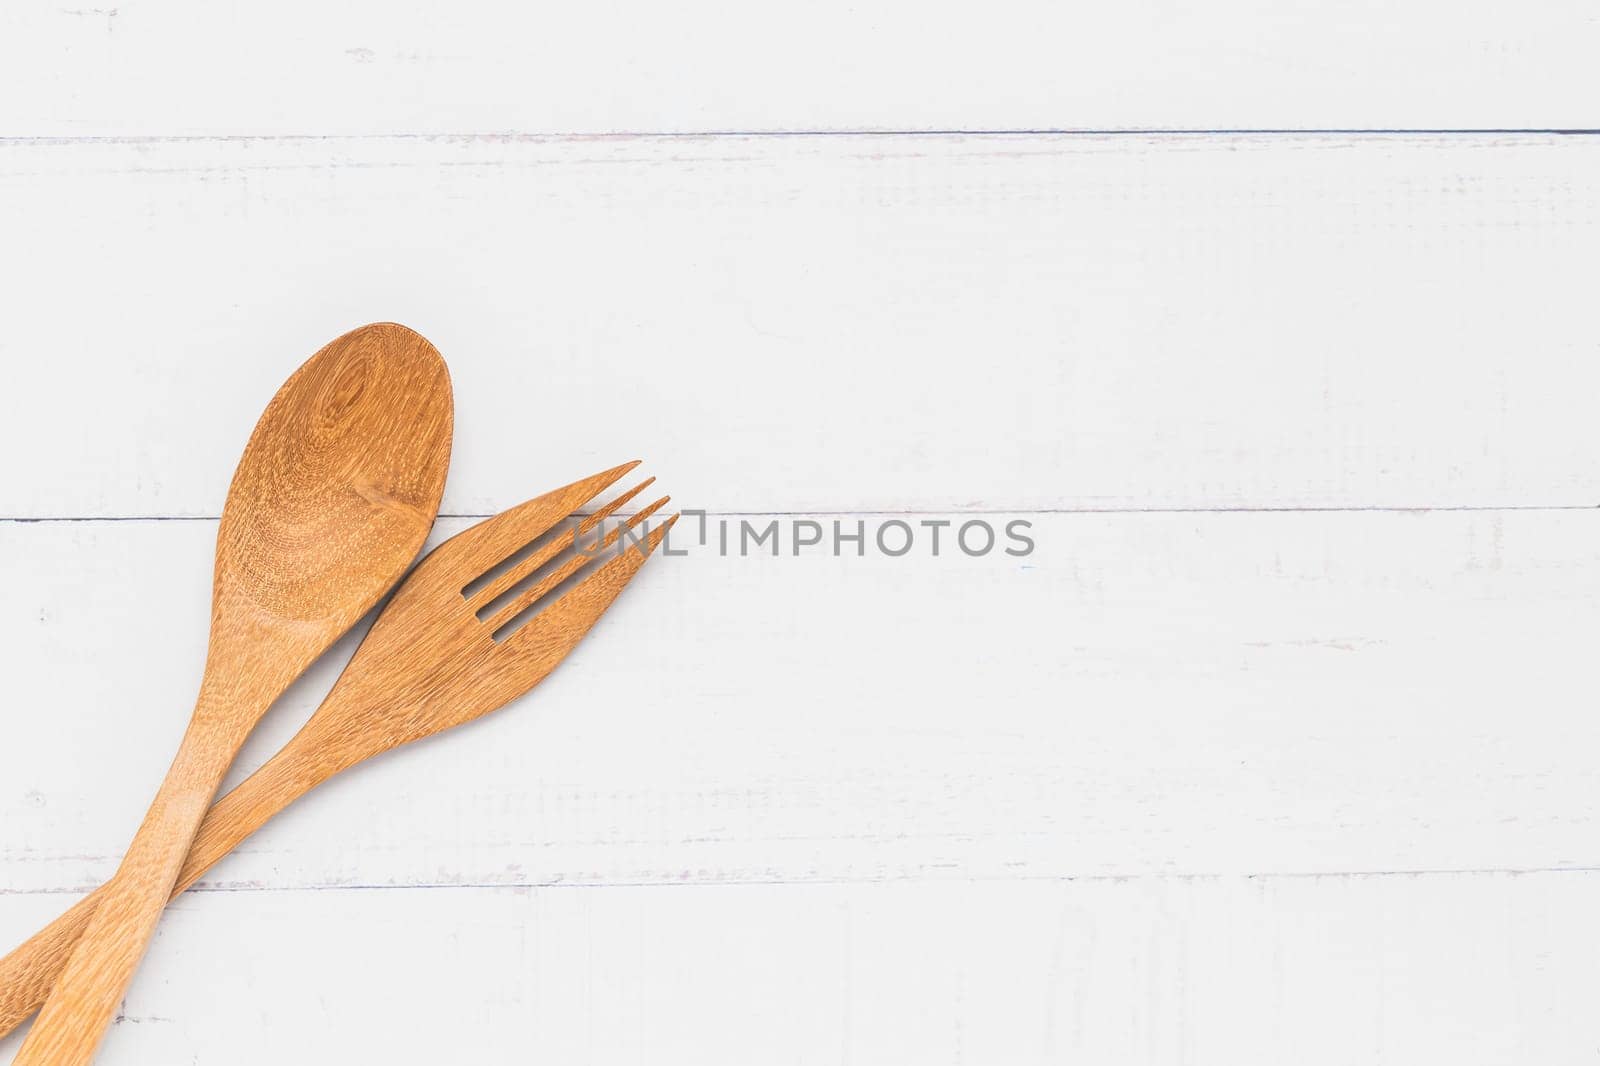 Wooden kitchen utensils including a spoon and fork on white table background by iamnoonmai